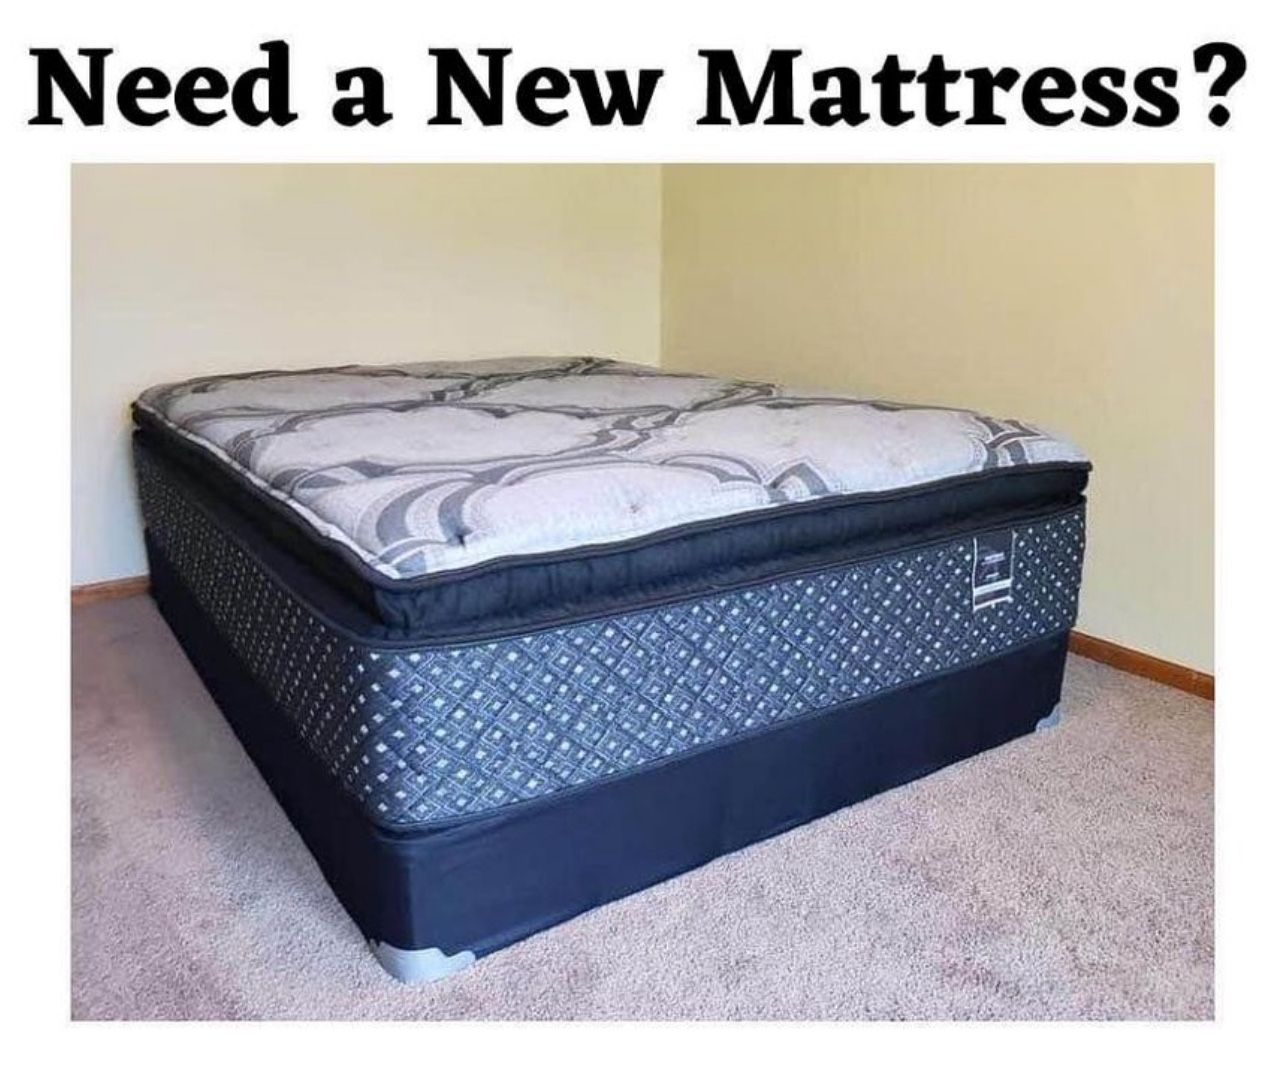 BRAND NEW MATTRESS SALE! 50% To 80% OFF RETAIL! $10 DOWN TAKES IT HOME TODAY!